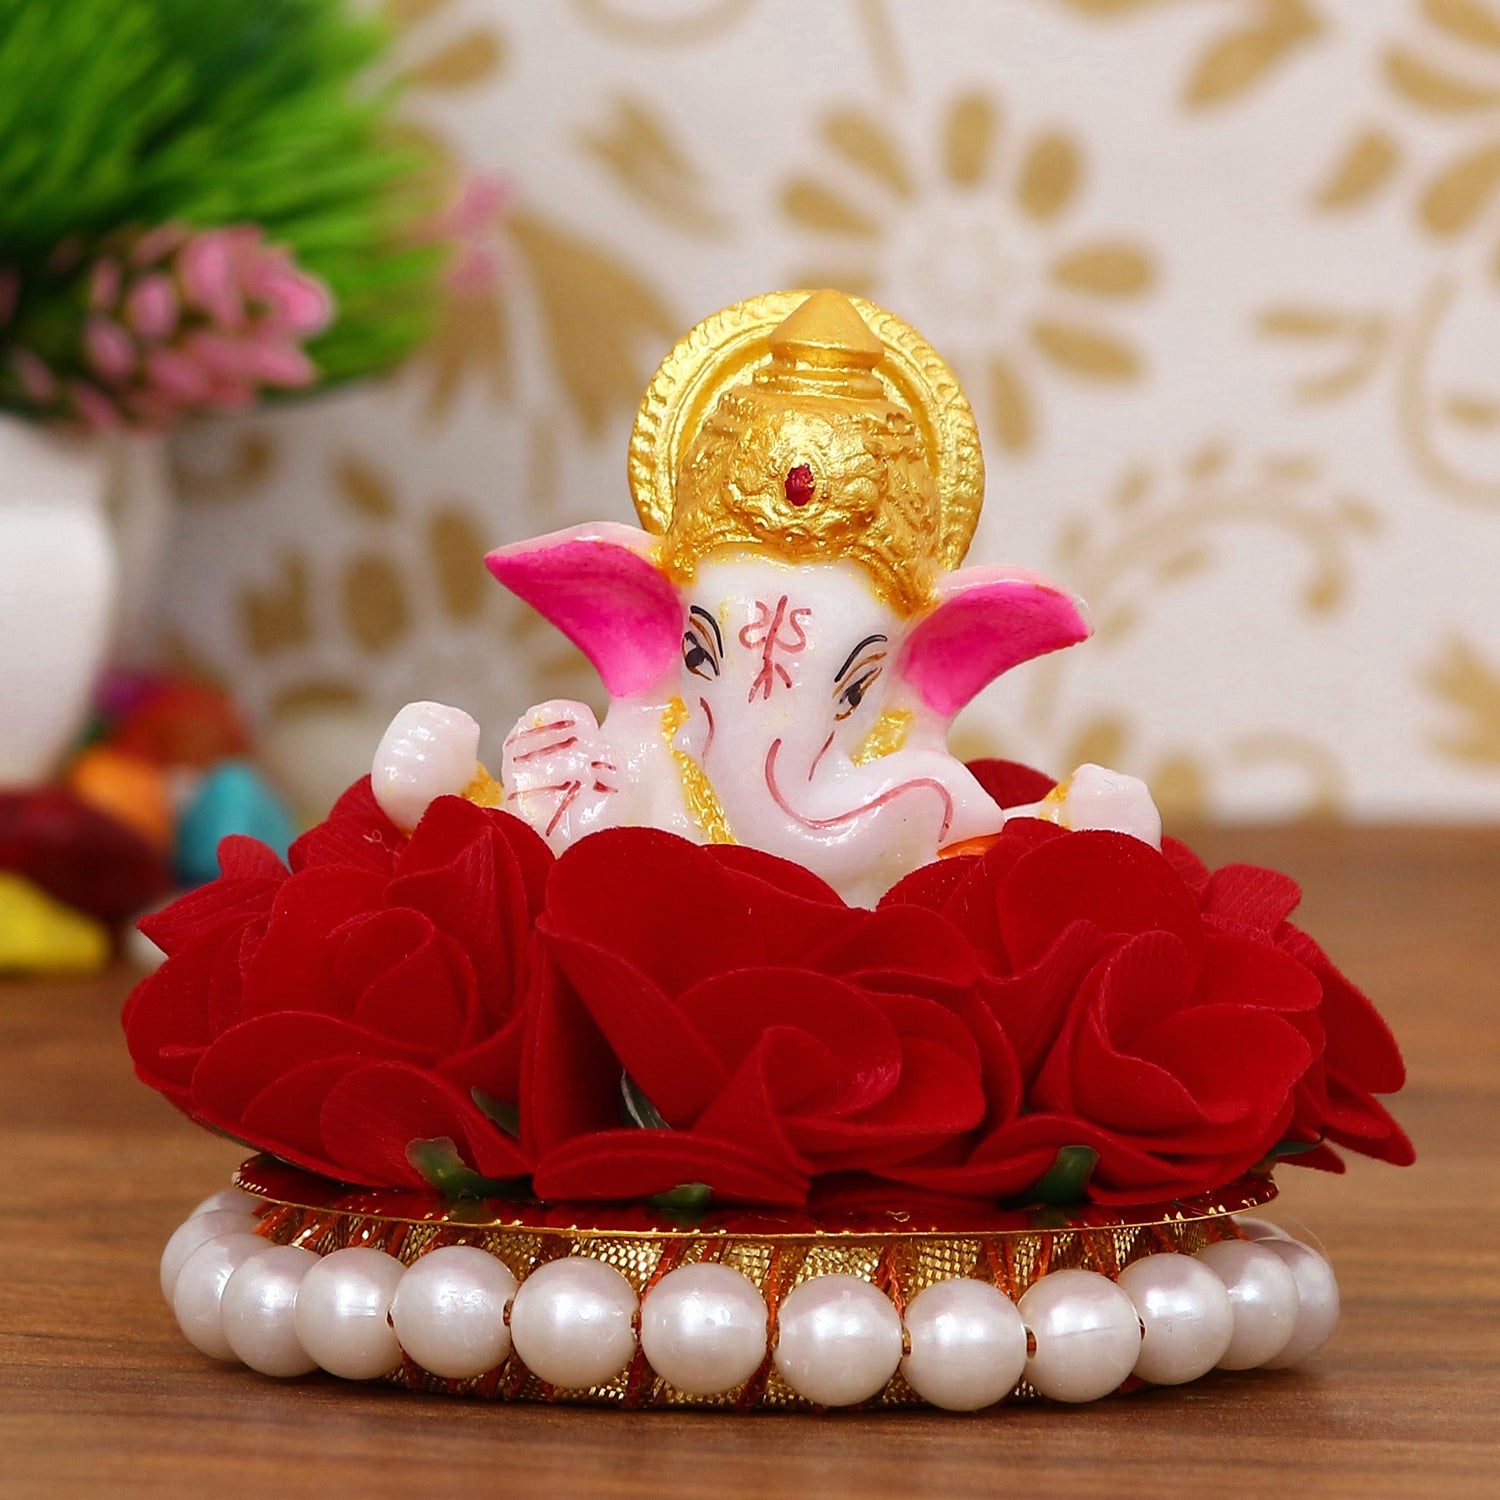 Lord Ganesha Idol on Decorative Handcrafted Plate with Red Flowers